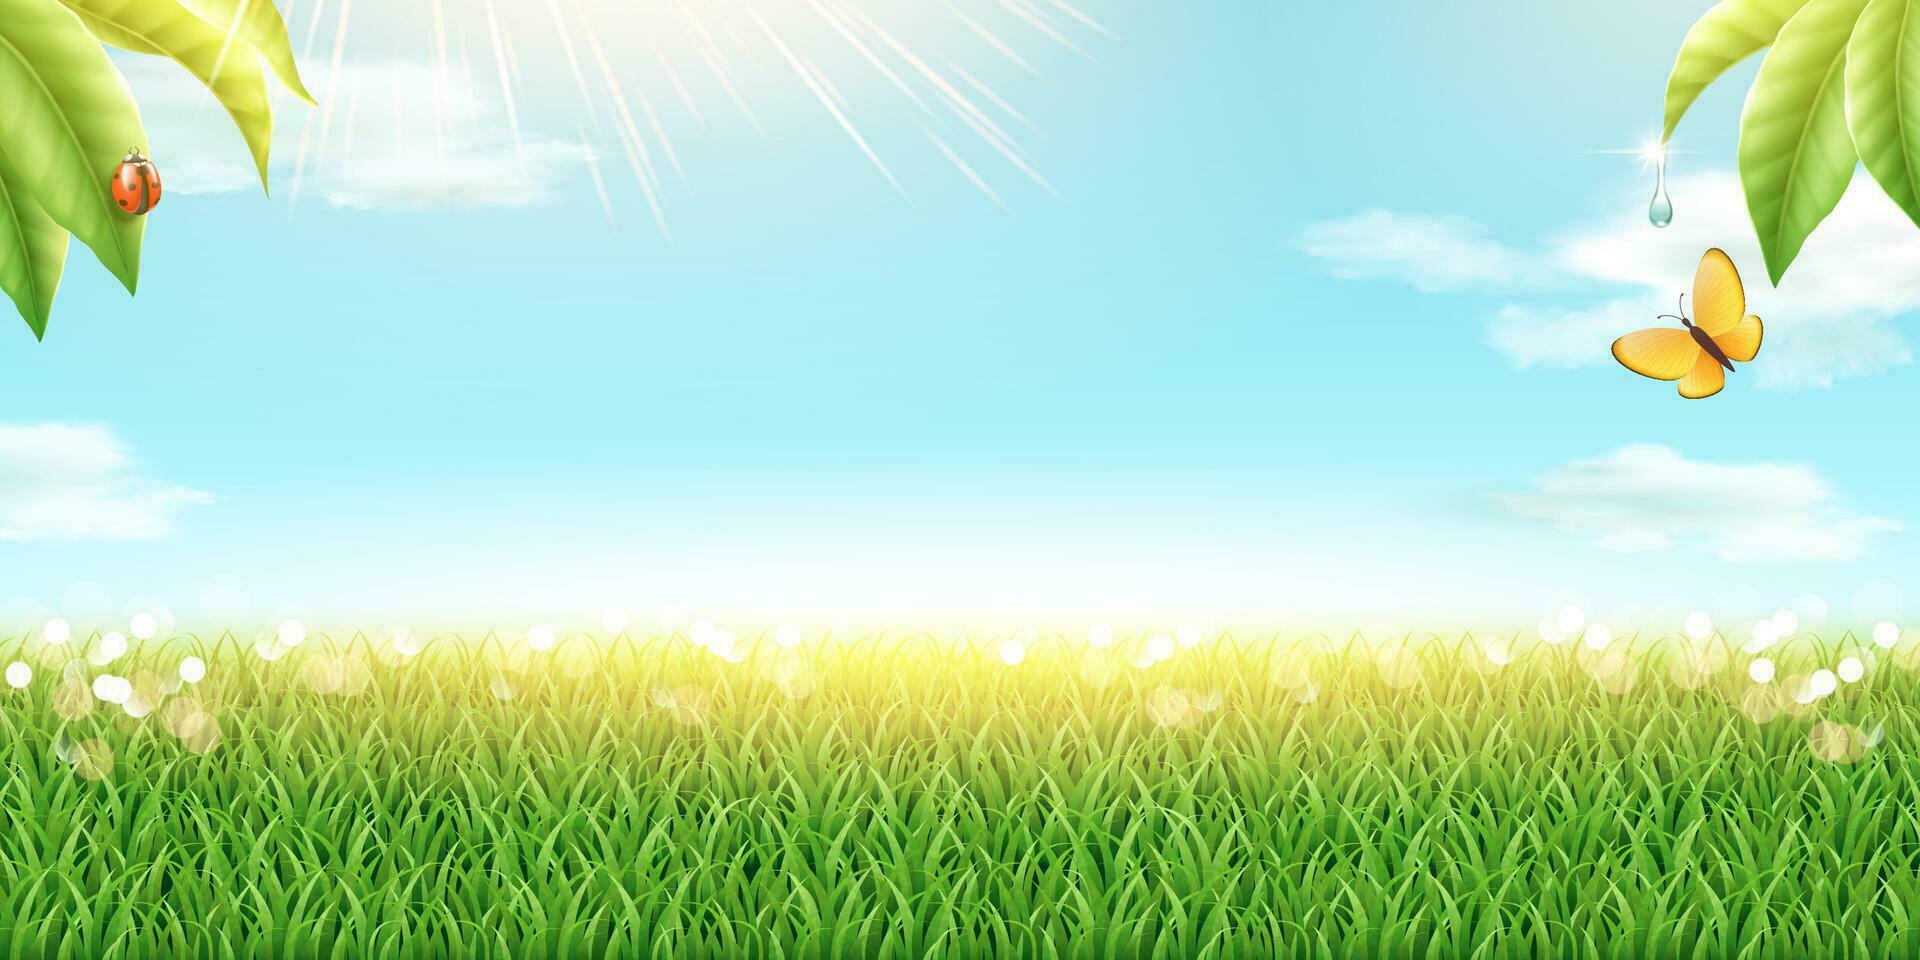 Refreshing green grass and blue sky background in 3d illustration vector